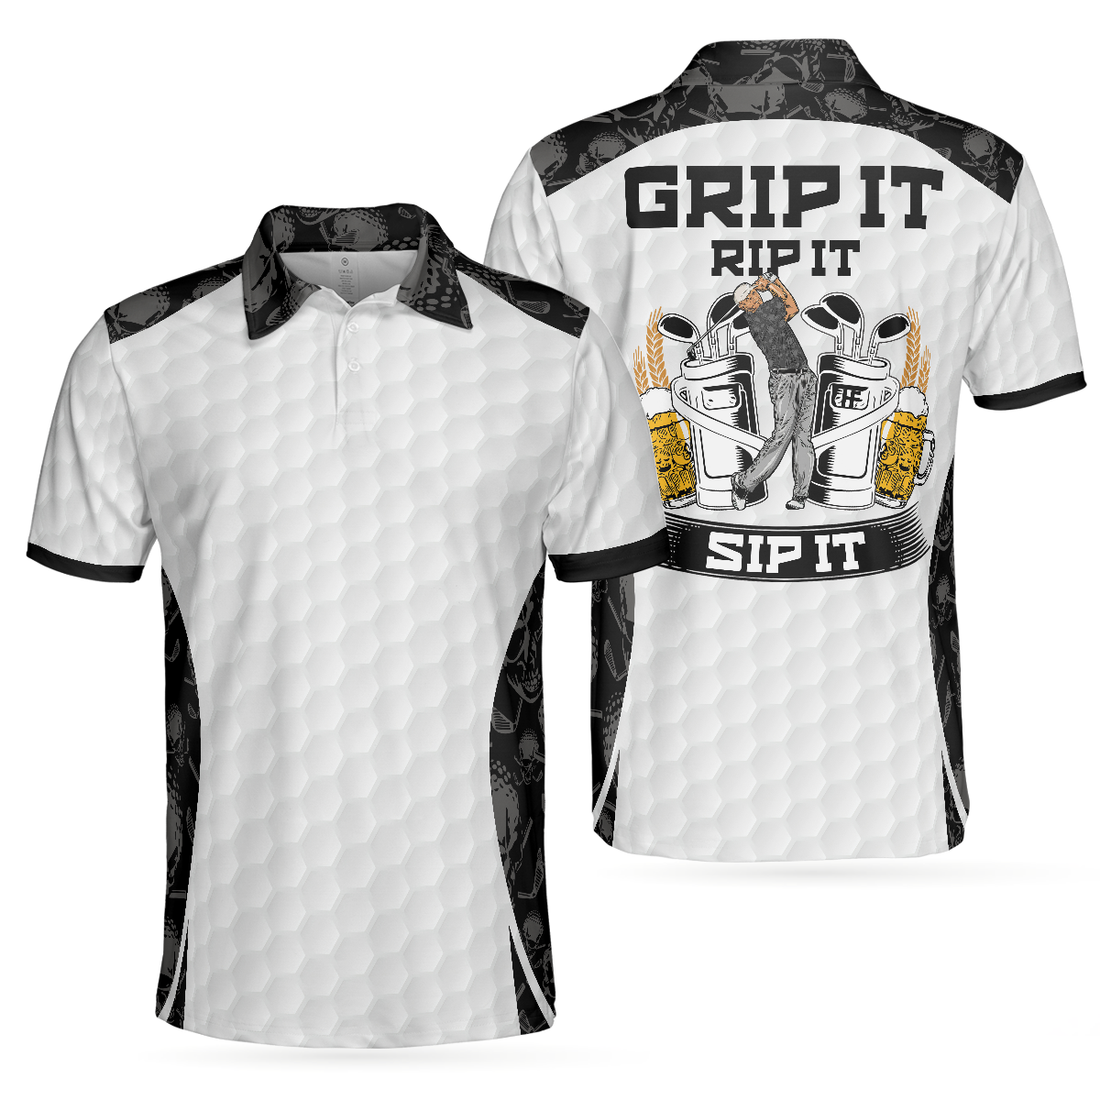 Grip It Rip It Sip It Golf White Polo Shirt Skull Pattern Shirt For Christmas Scary Gift Idea For Golfers - 1